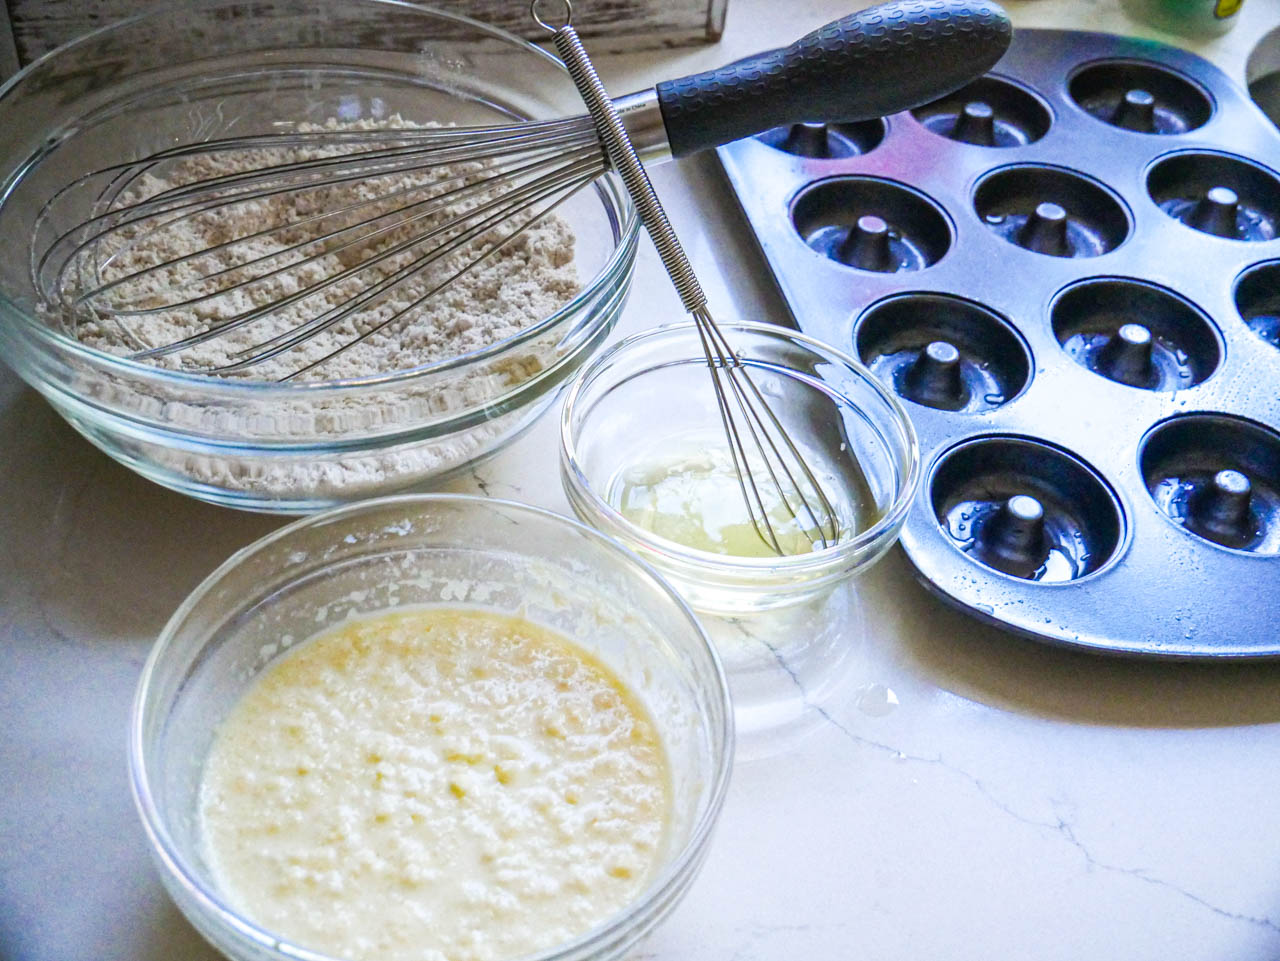 Flour and whisk in a bowl, wet ingredients in another bowl, egg whites in a small bowl on a white counter top next to a mini donut pan.